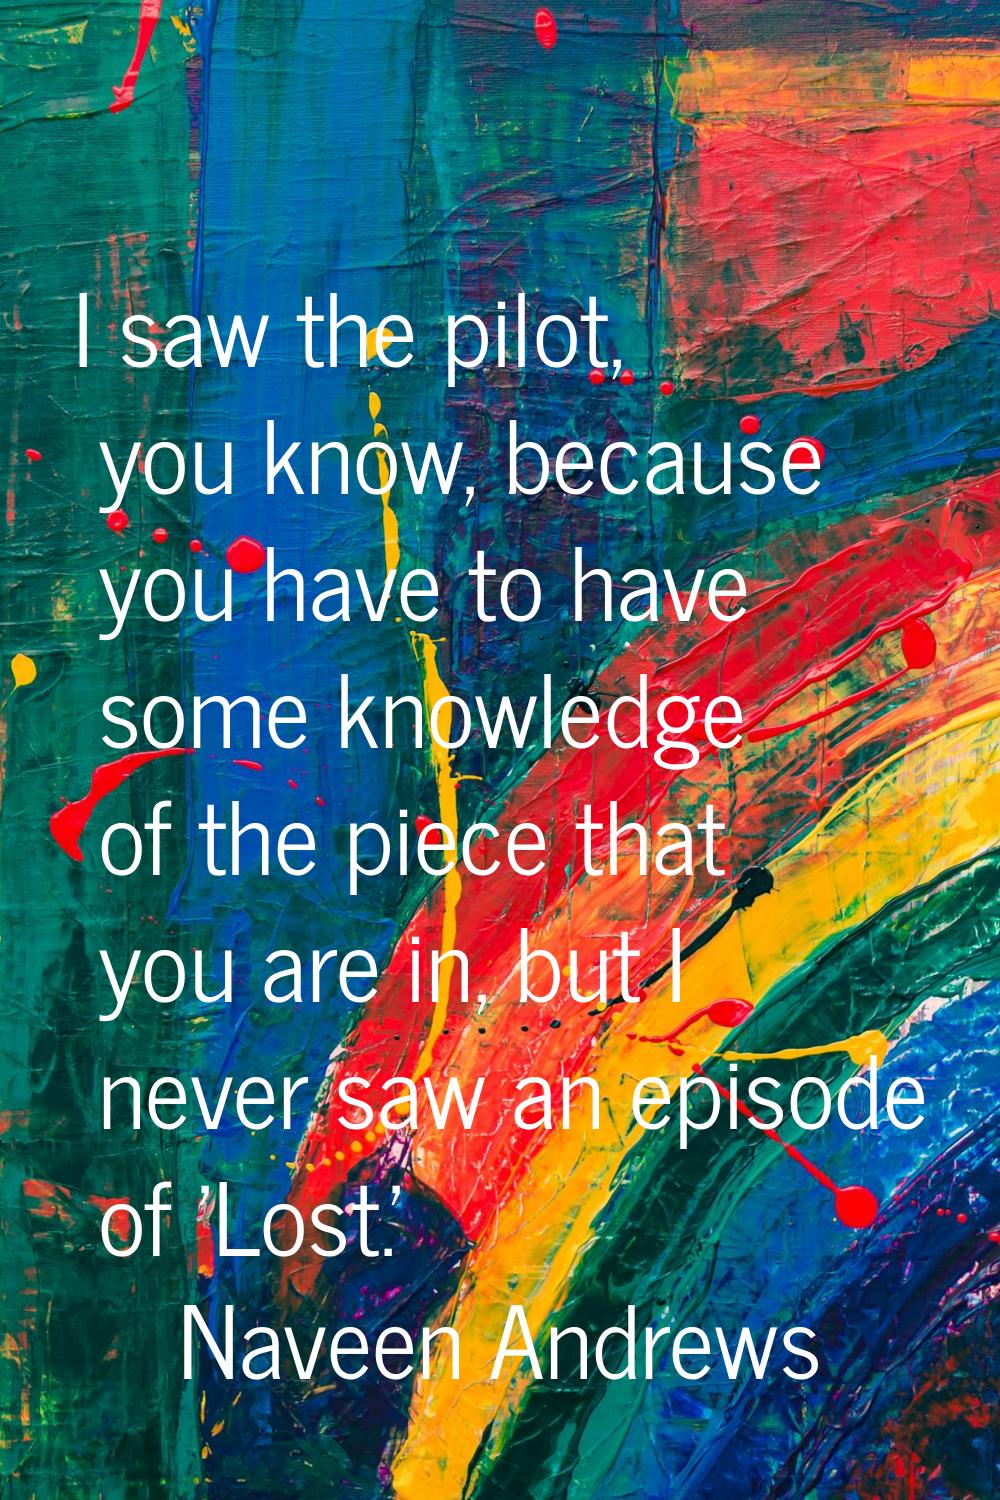 I saw the pilot, you know, because you have to have some knowledge of the piece that you are in, bu